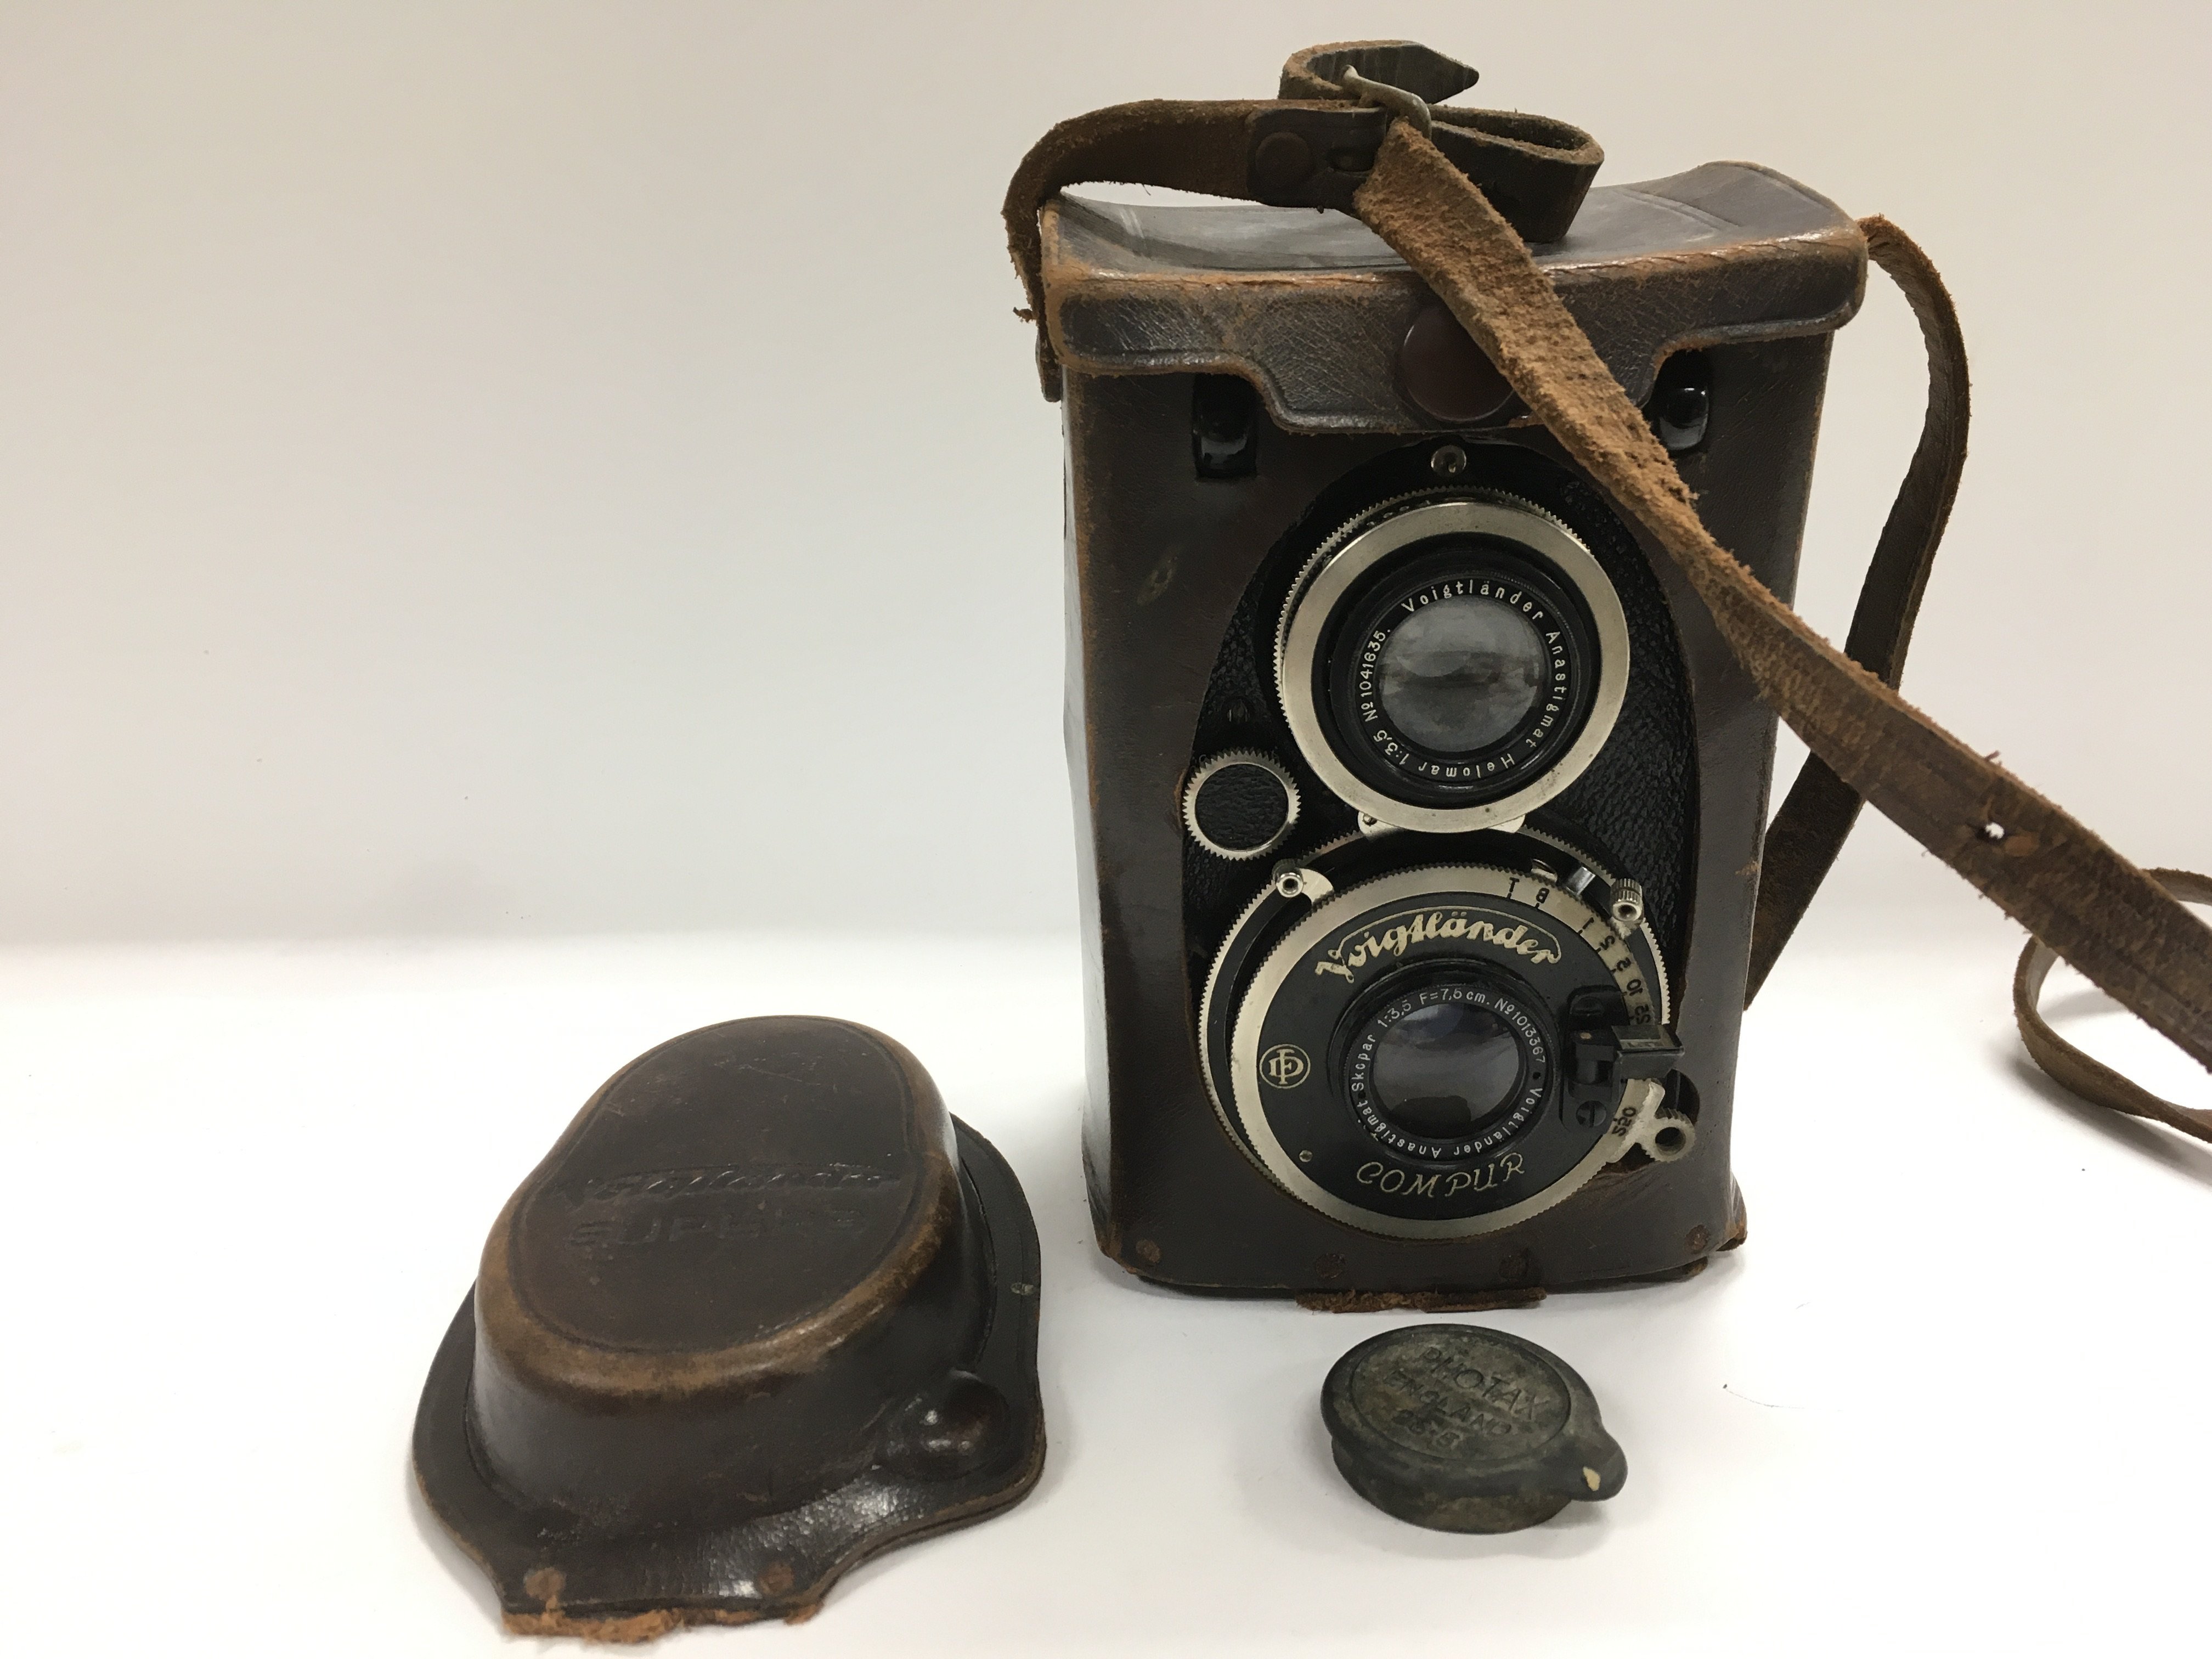 A Voigtlander Compur Superb camera in a fitted lea